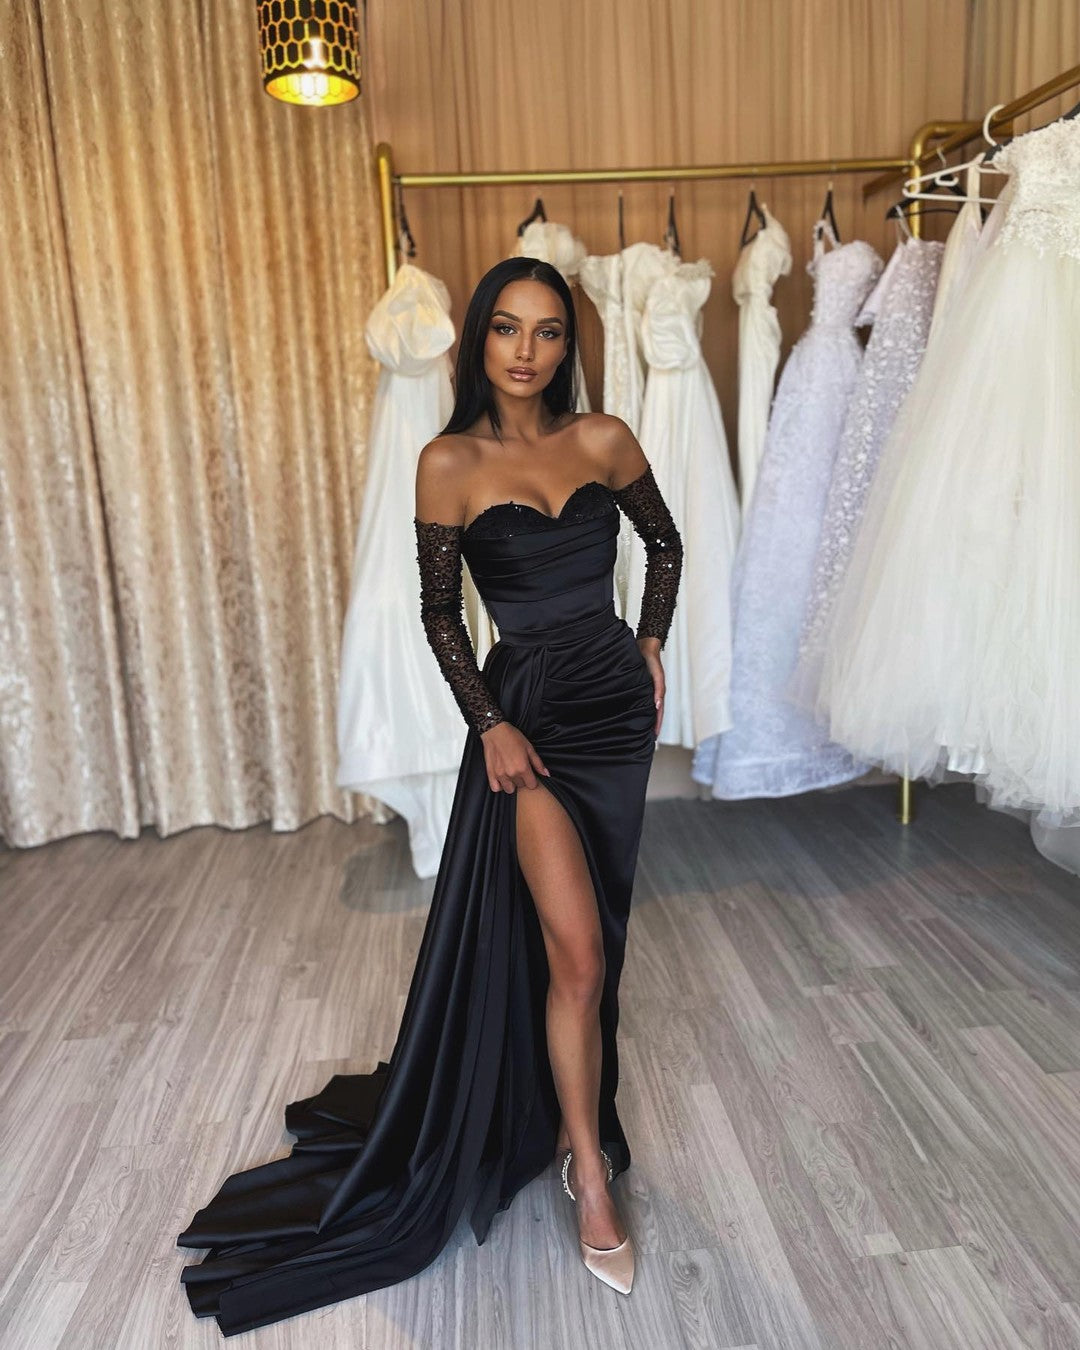 Sequined Lace Ball Gown Shimmer Prom Dress With Sparkling Details And Long  Sleeves Floor Length Evening Gresses For Women Style 268F From Hhdy518,  $150.76 | DHgate.Com